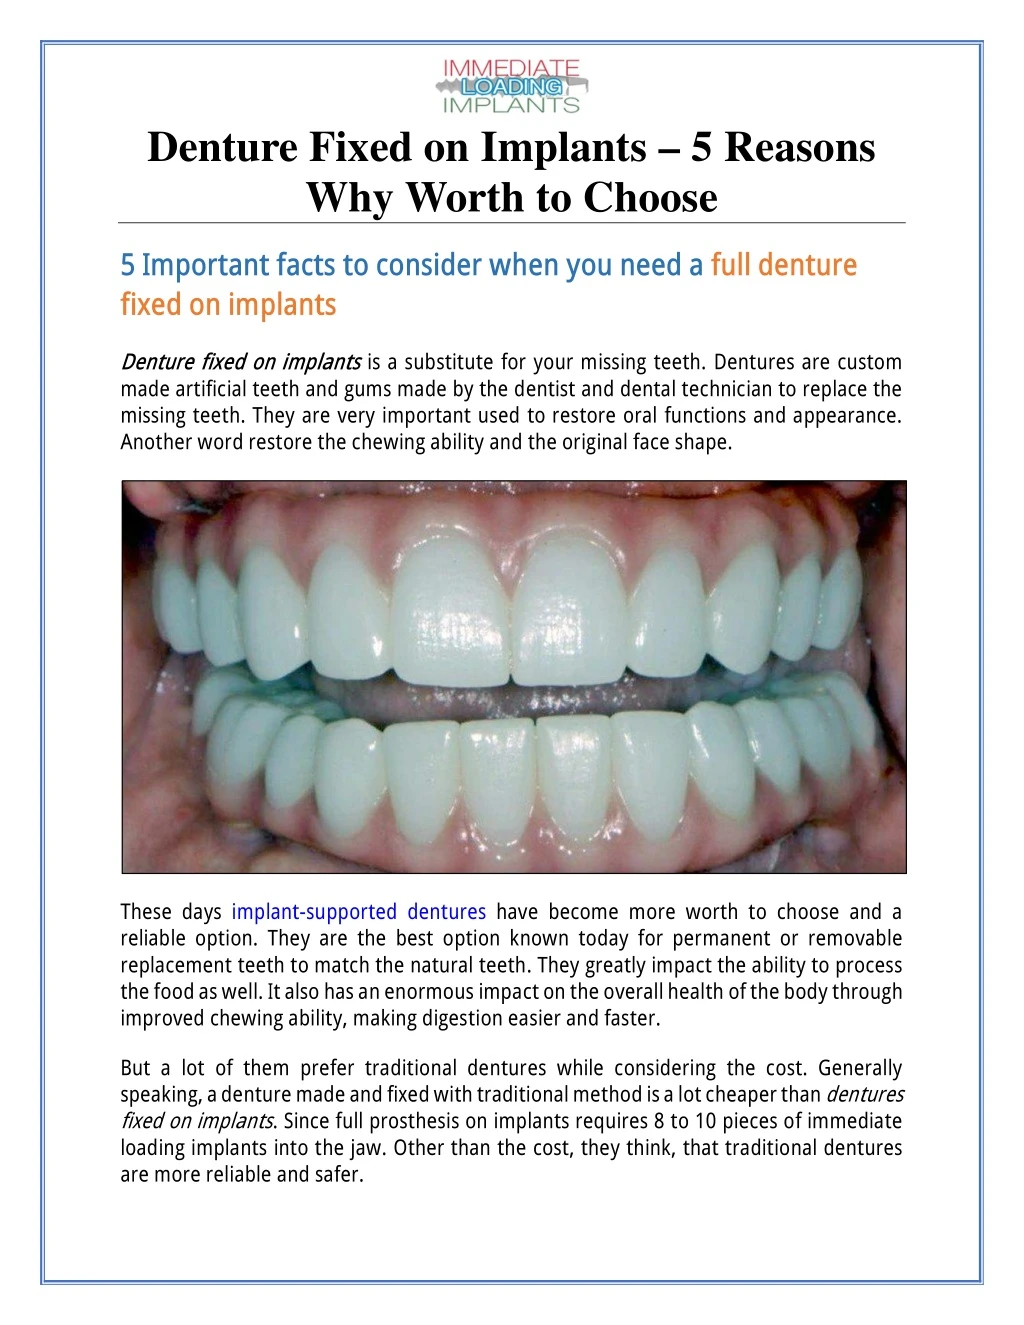 denture fixed on implants 5 reasons why worth